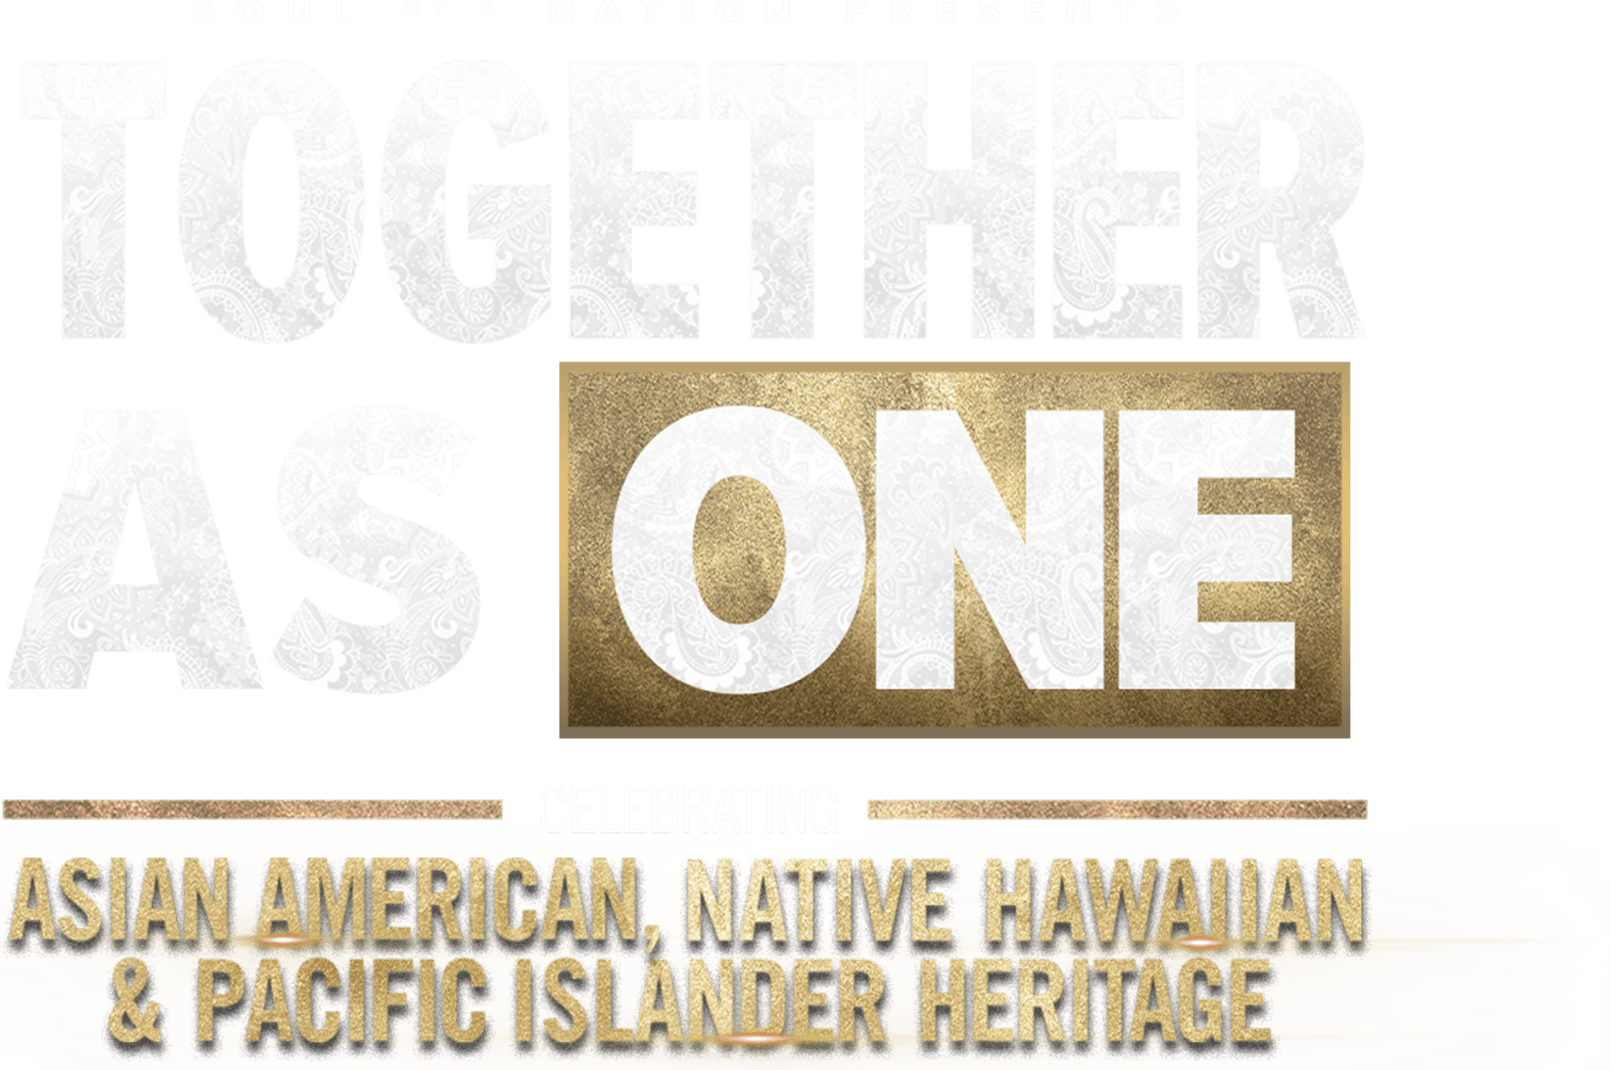 Soul of a Nation Presents: Together As One: Celebrating Asian American, Native Hawaiian and Pacific Islander Heritage logo